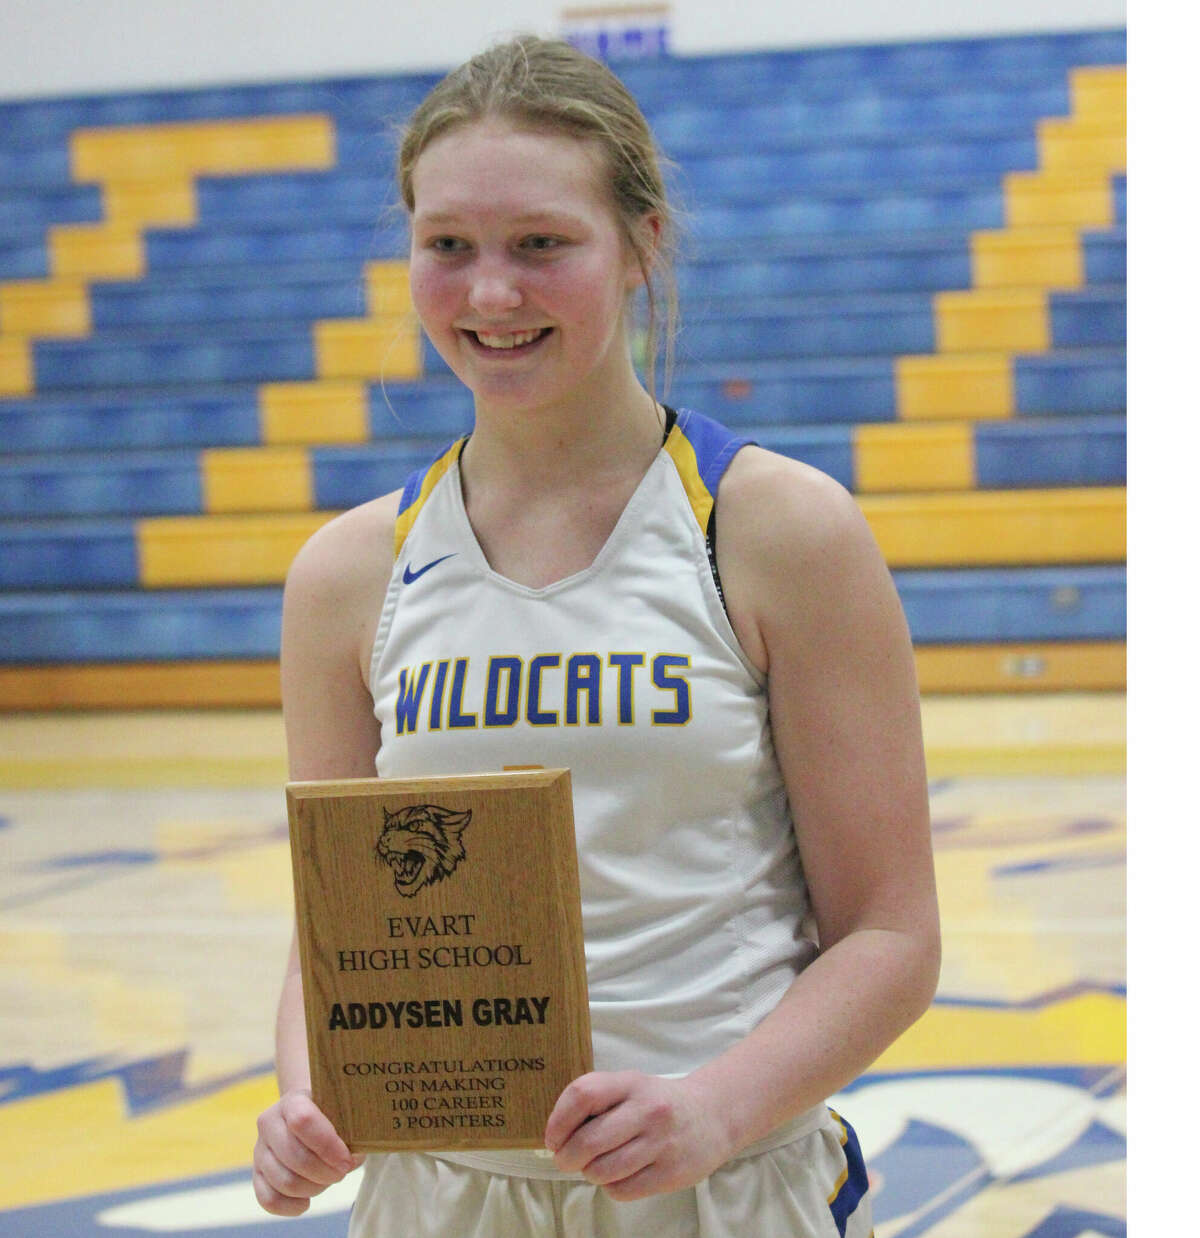 Evart on Monday night presented Addy Gray with a plaque for reaching 100 3 pointers in her career.